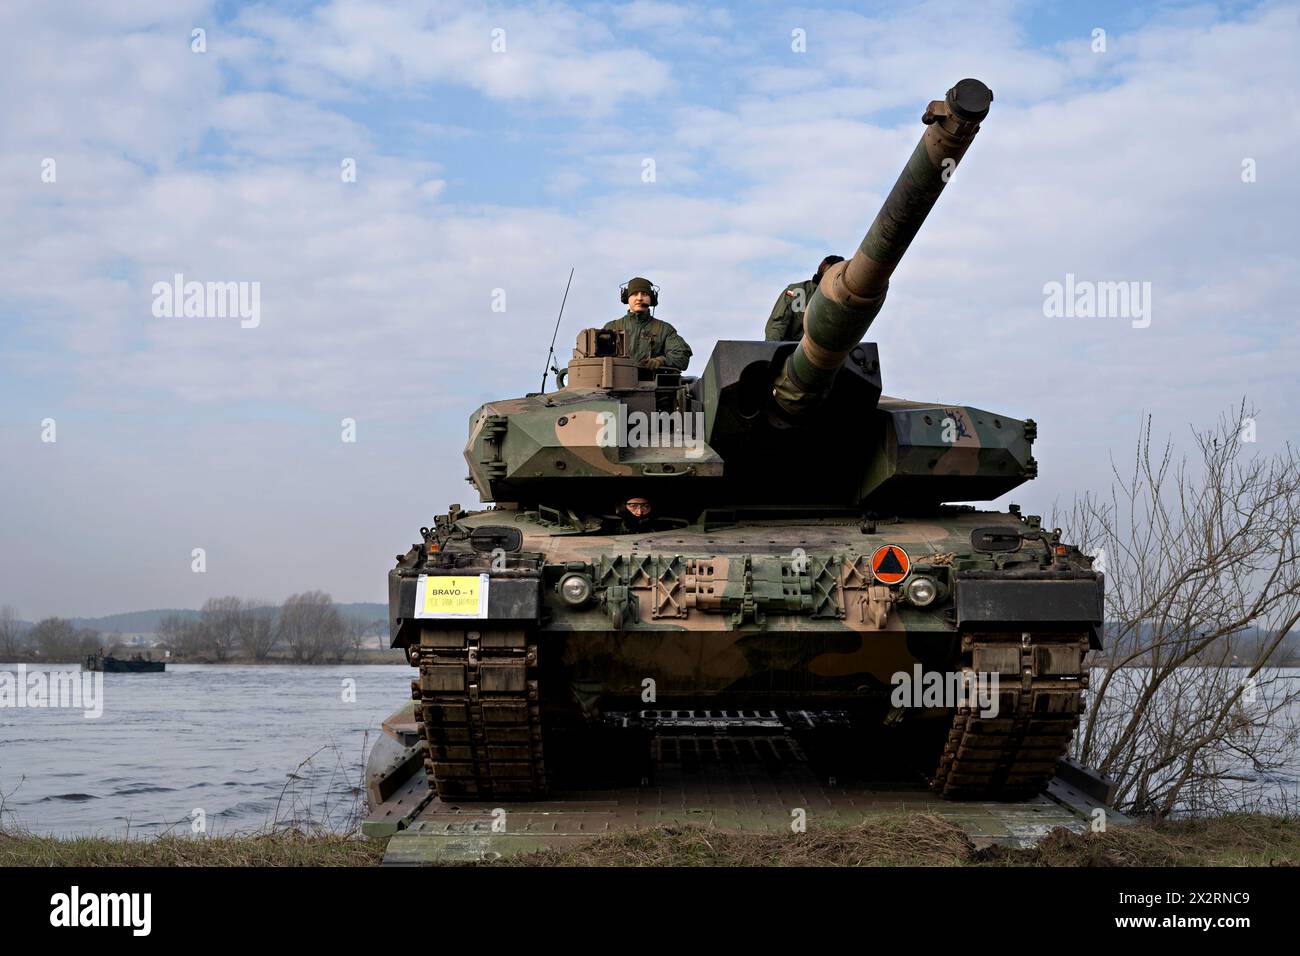 Gniew, Poland. 03 March, 2024. A French Army Leclerc S2 main battle tank crosses the Vistula River during the Polish-led Dragon-24 military exercise, March 4, 2024, in Gniew, Poland. The large scale exercise involved moving armor from 8 NATO countries across the Polish countryside during winter conditions.  Credit: SFC Kyle Larsen/US Army Photo/Alamy Live News Stock Photo